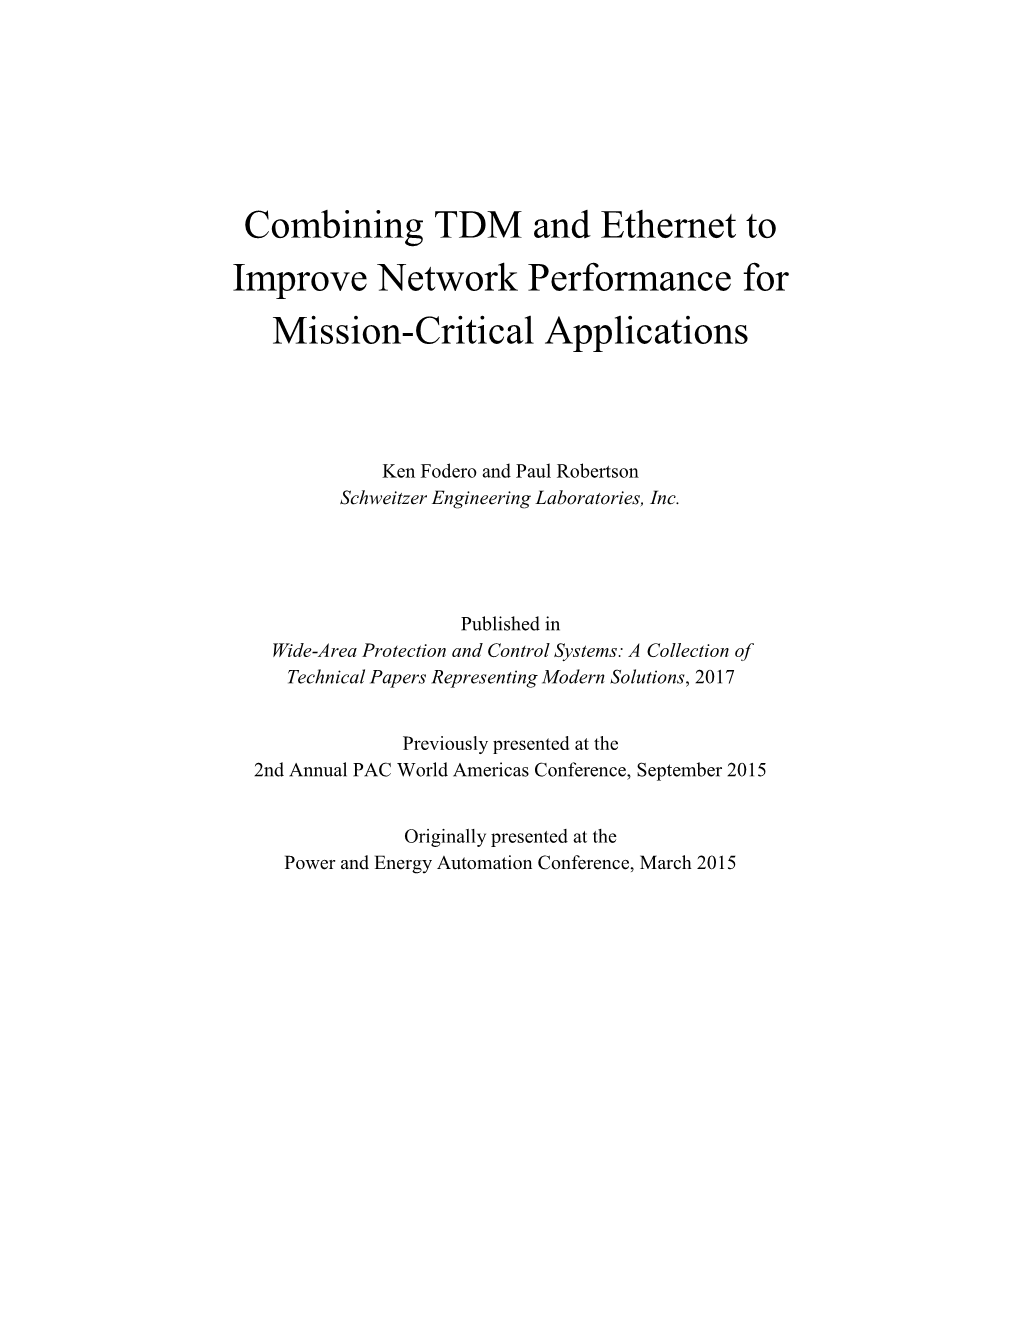 Combining TDM and Ethernet to Improve Network Performance for Mission-Critical Applications